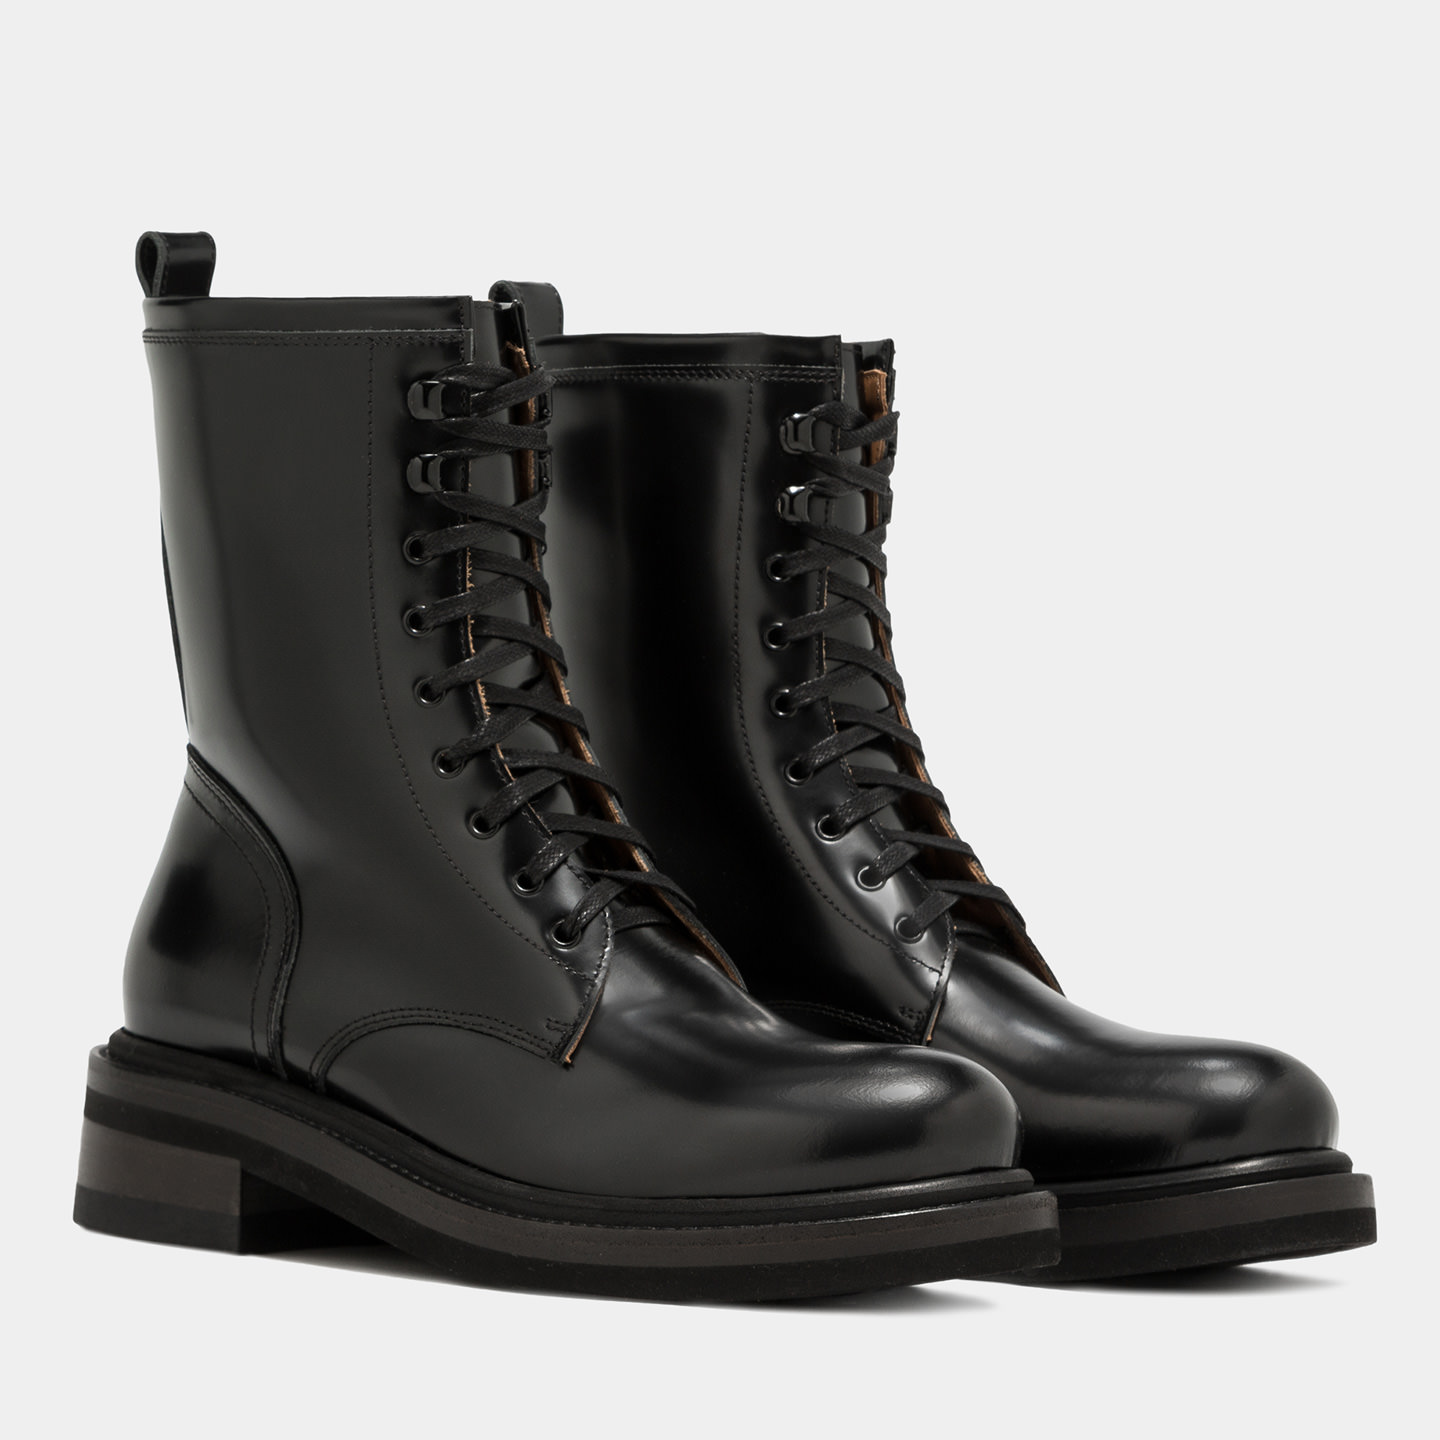 BUTTERO COMBAT BOOTS IN BRUSHED LEATHER COLOR BLACK B9240JIV-DG1/01-NERO